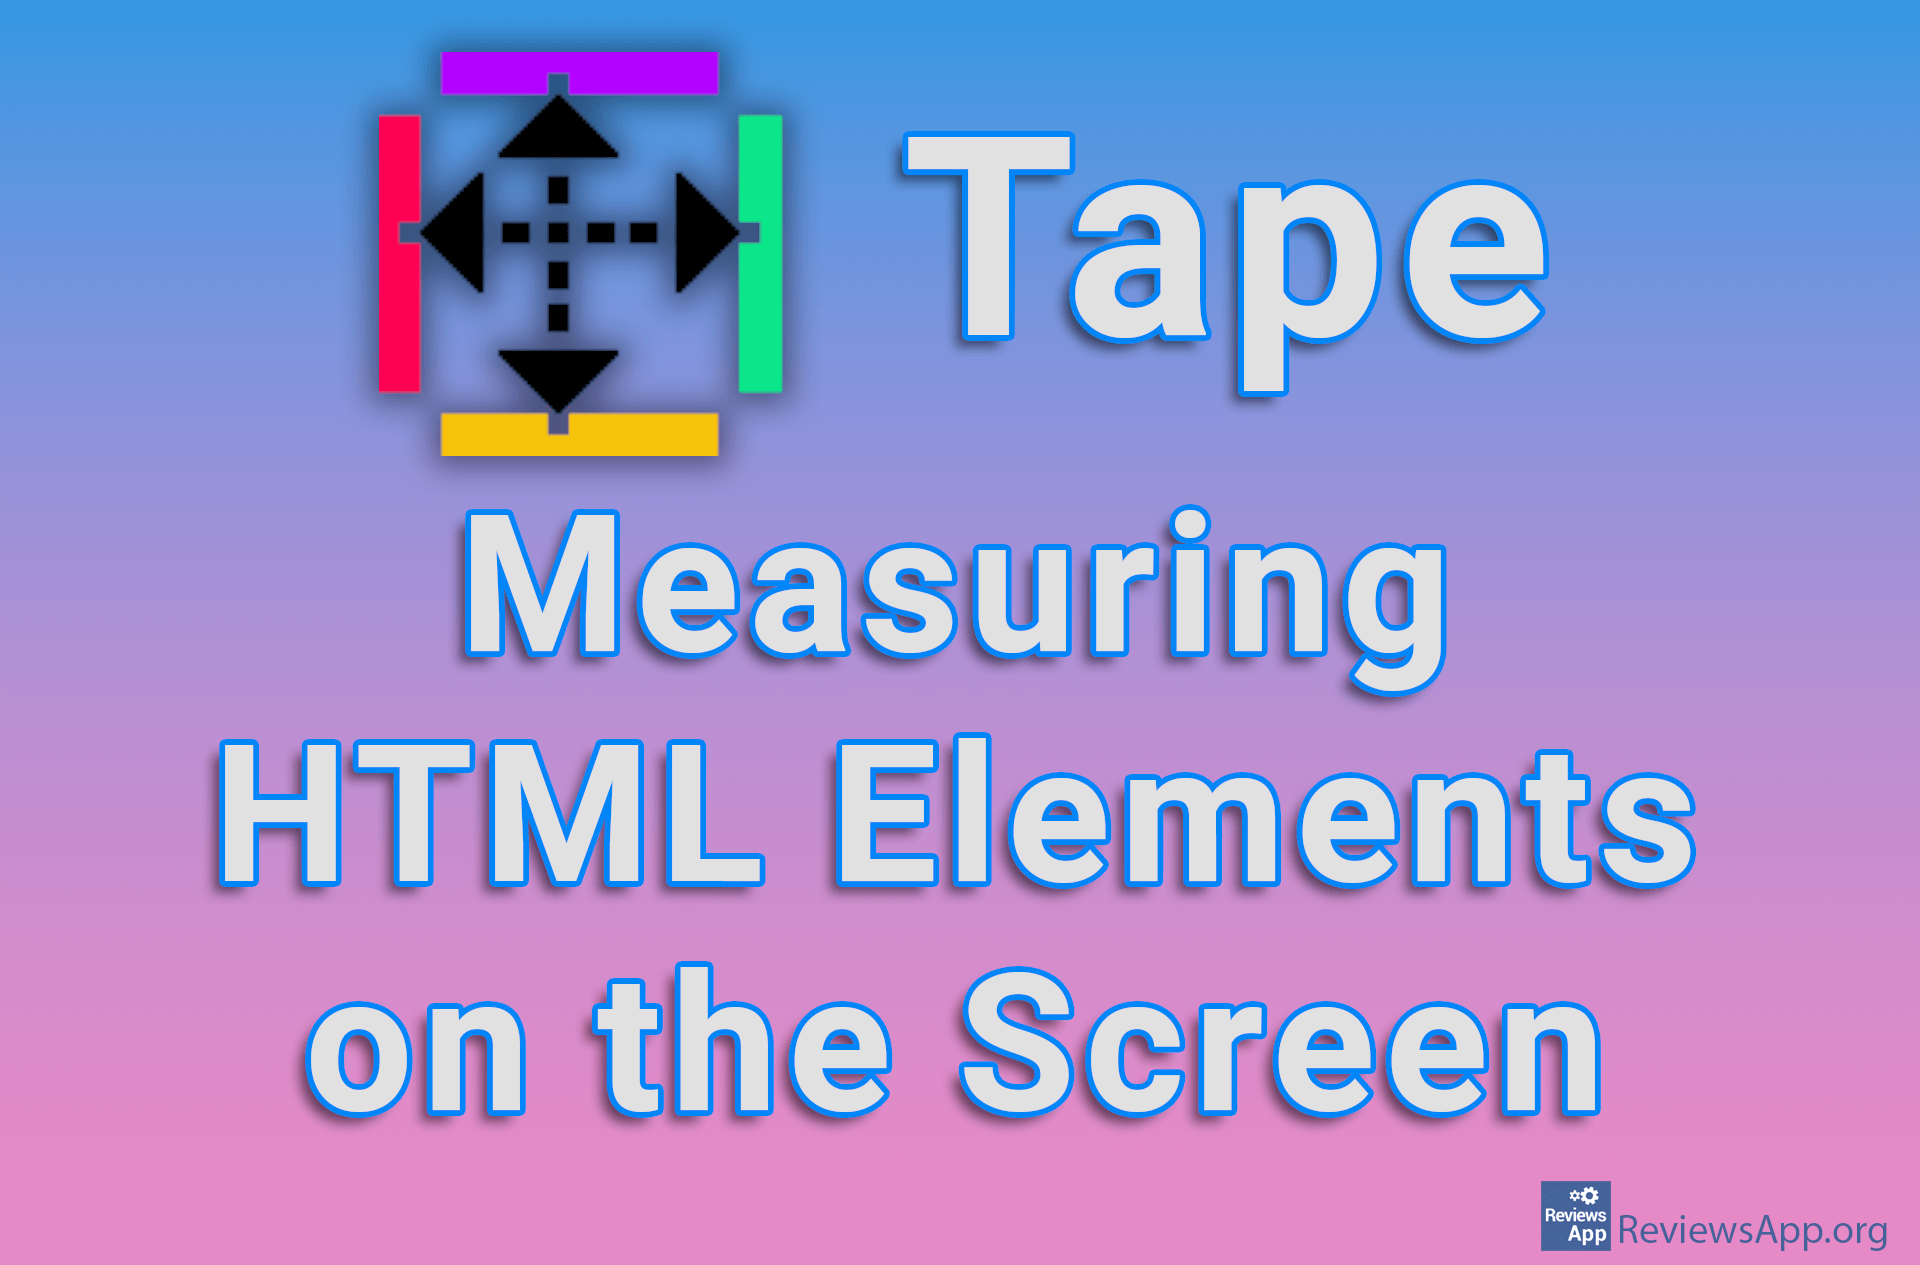 Tape – Measuring HTML Elements on the Screen